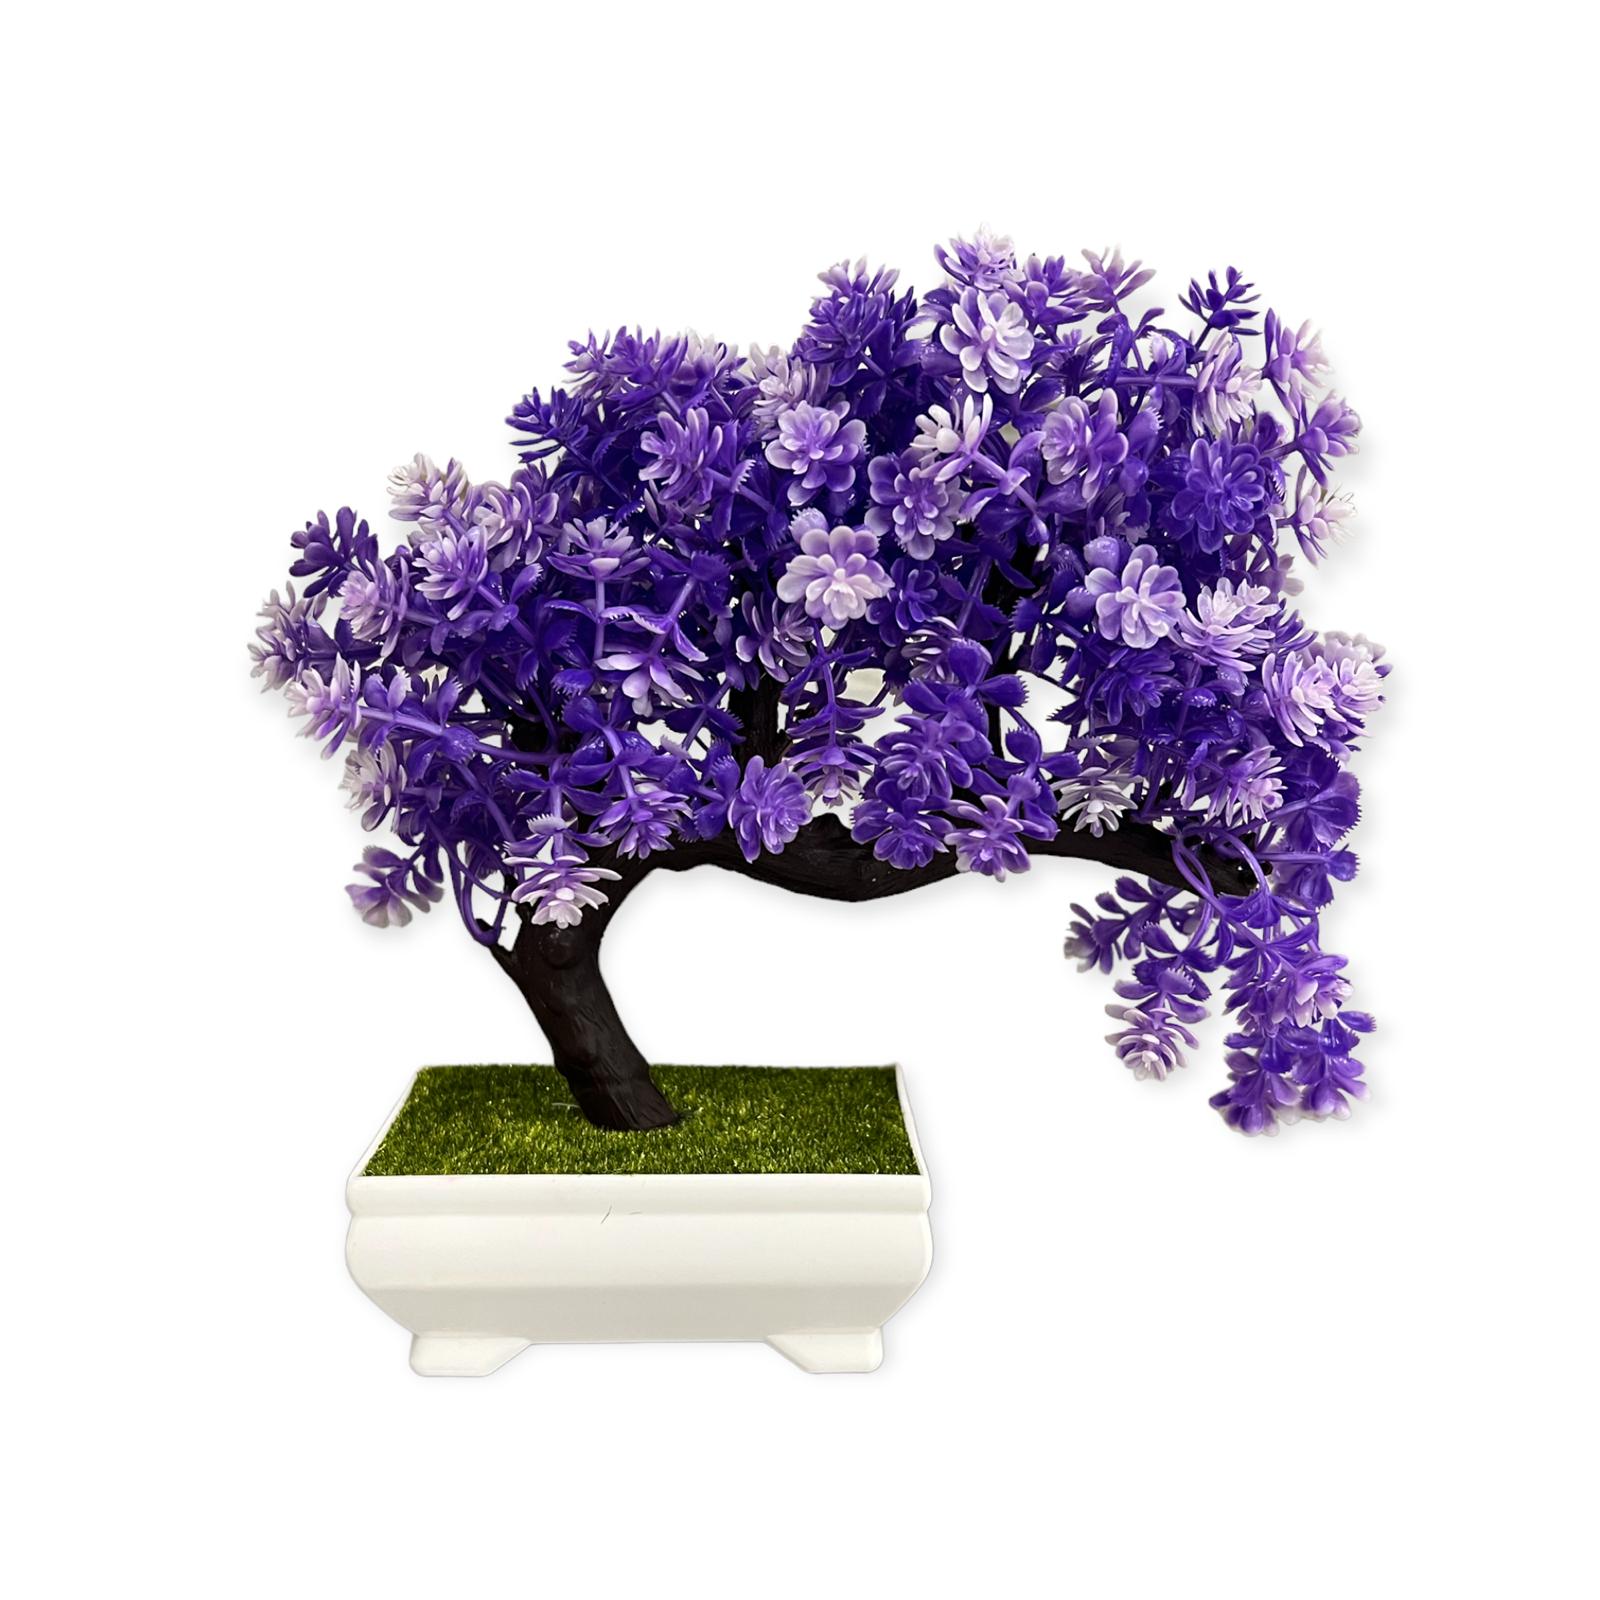 Artificial : Sideways Bonsai in Different Colored Leaves Online on Sale from HnG Nursery for trees & plants